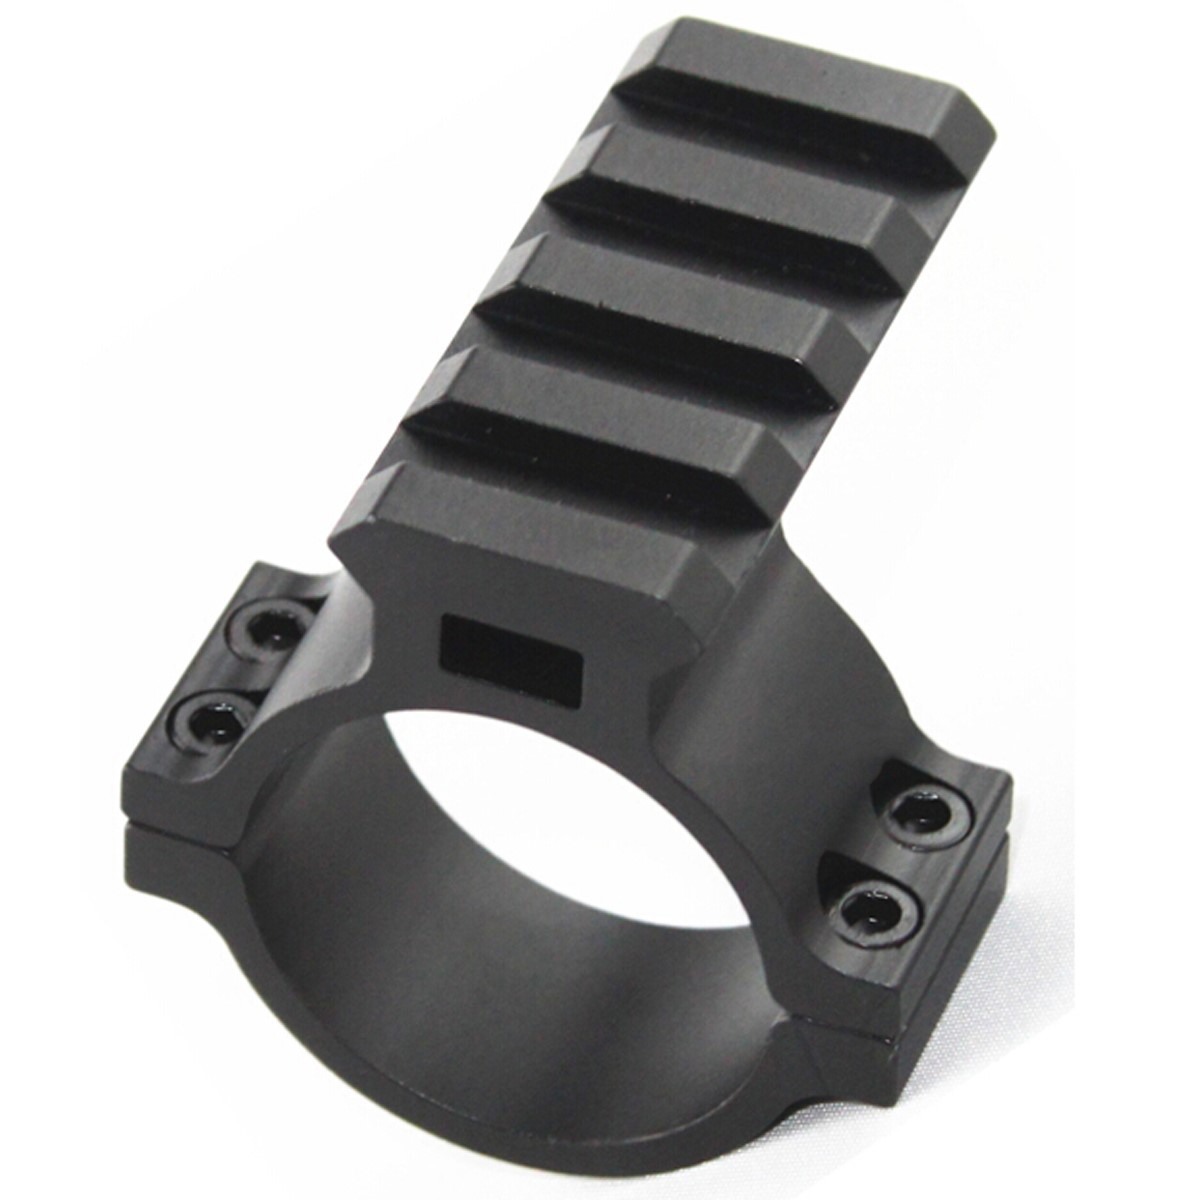 29 mm Center Height WestHunter Industrial Grade 21 mm Picatinny Scope Rings 30 mm Tactical Precision Scope Mount 